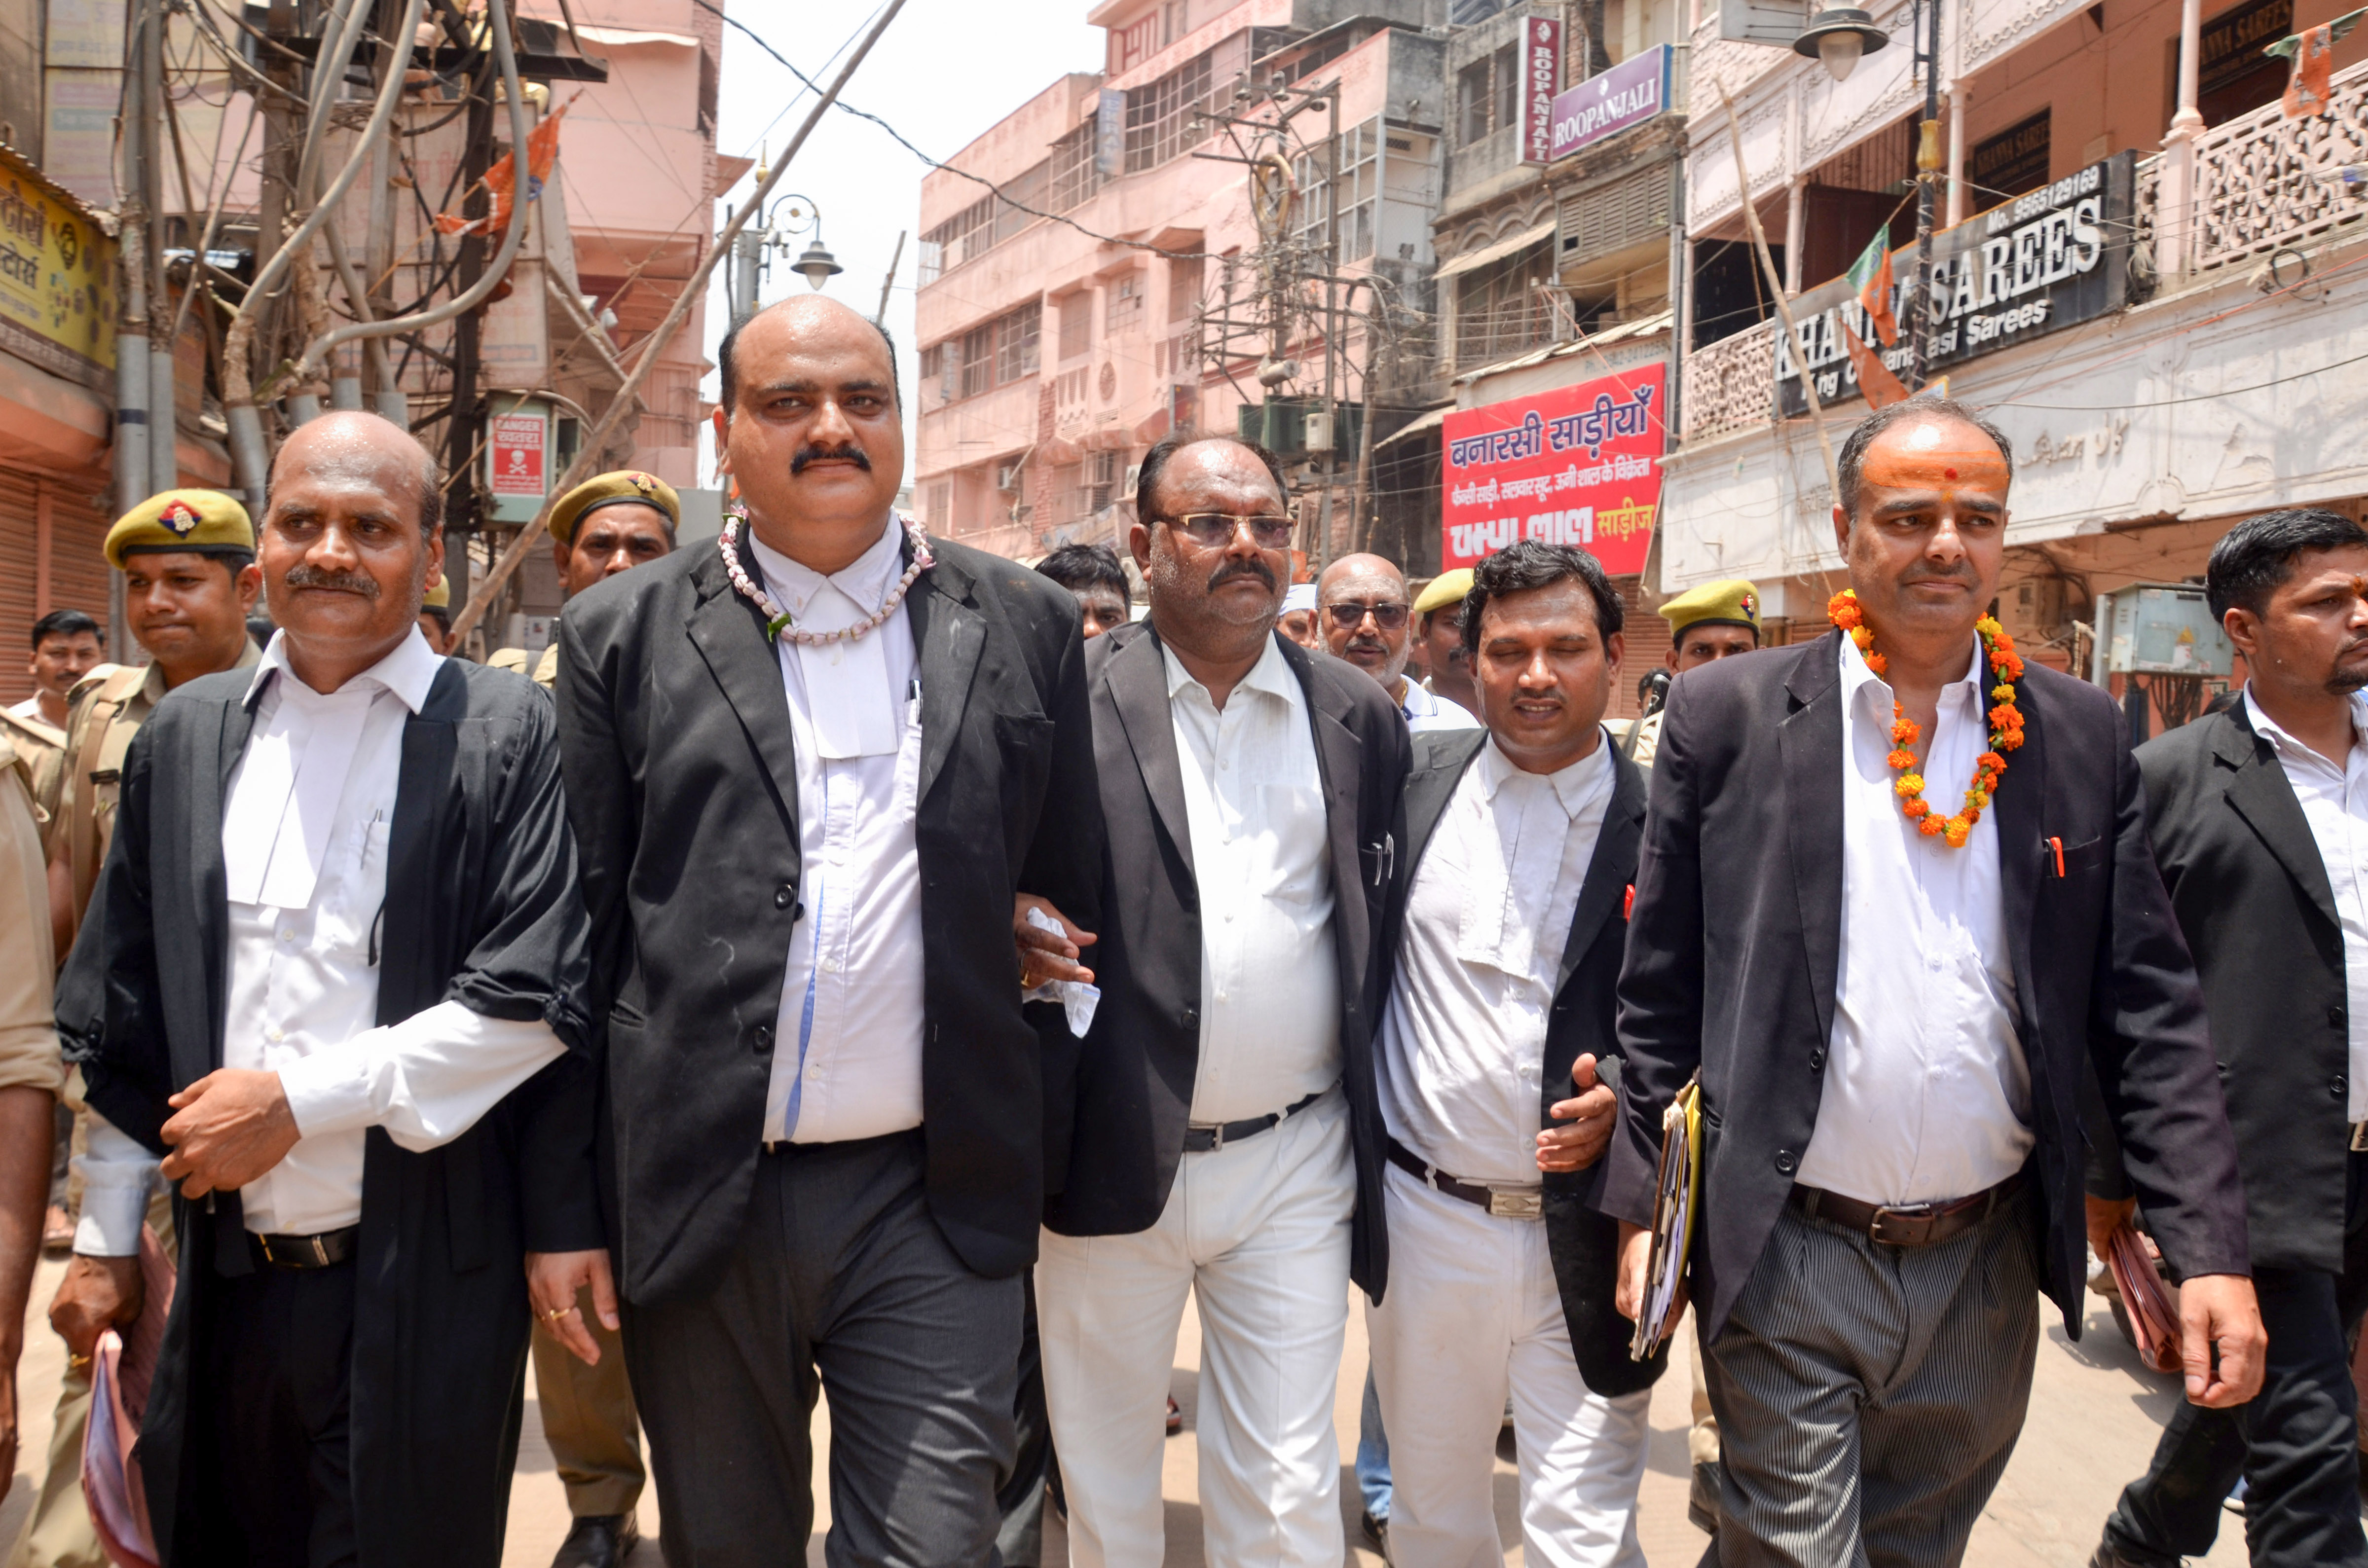 Gyanvapi: Varanasi court grants two days' time to submit survey report